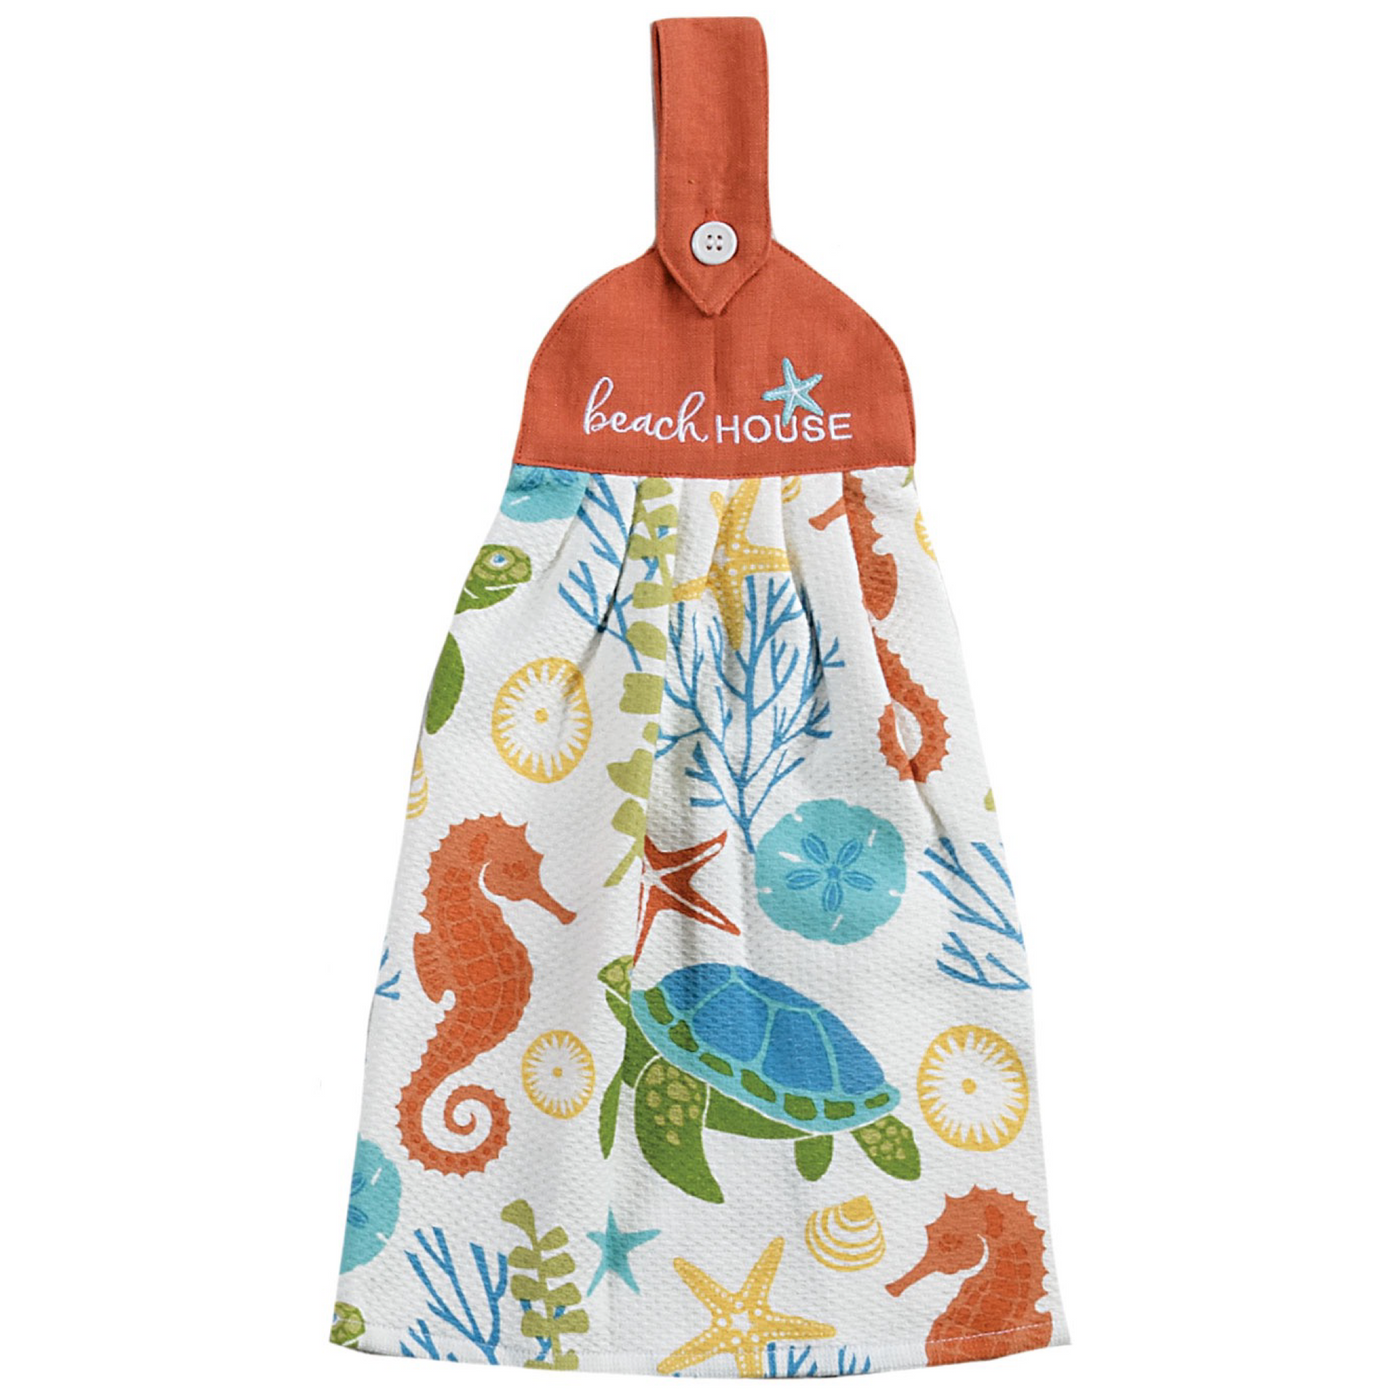 Textured tea towel with button loop closur for hanging. Printed with seahorses, sand dollars, sea turtles, sea shellls, and various sea life. Embroidered top reads Beach House with an embroidered starfish accent. 